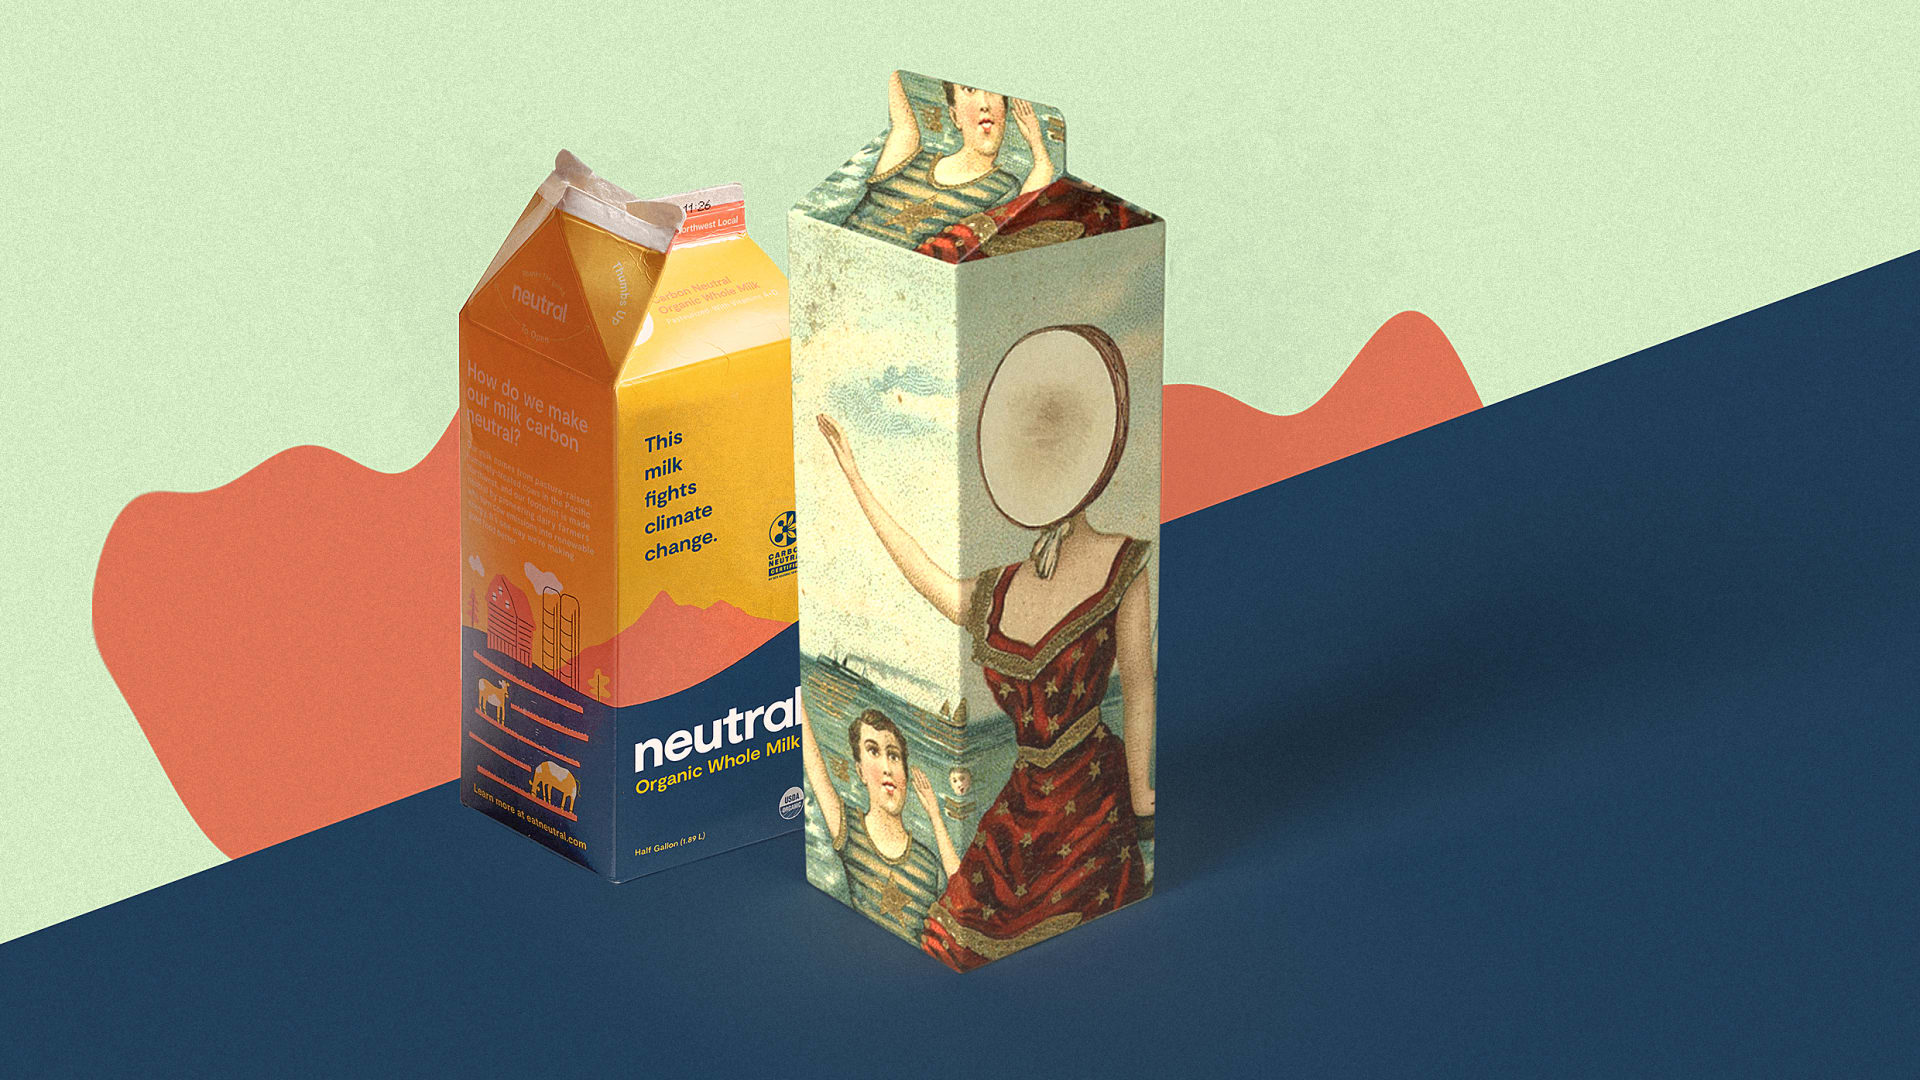 What does Neutral Milk Hotel think of the new Neutral milk?